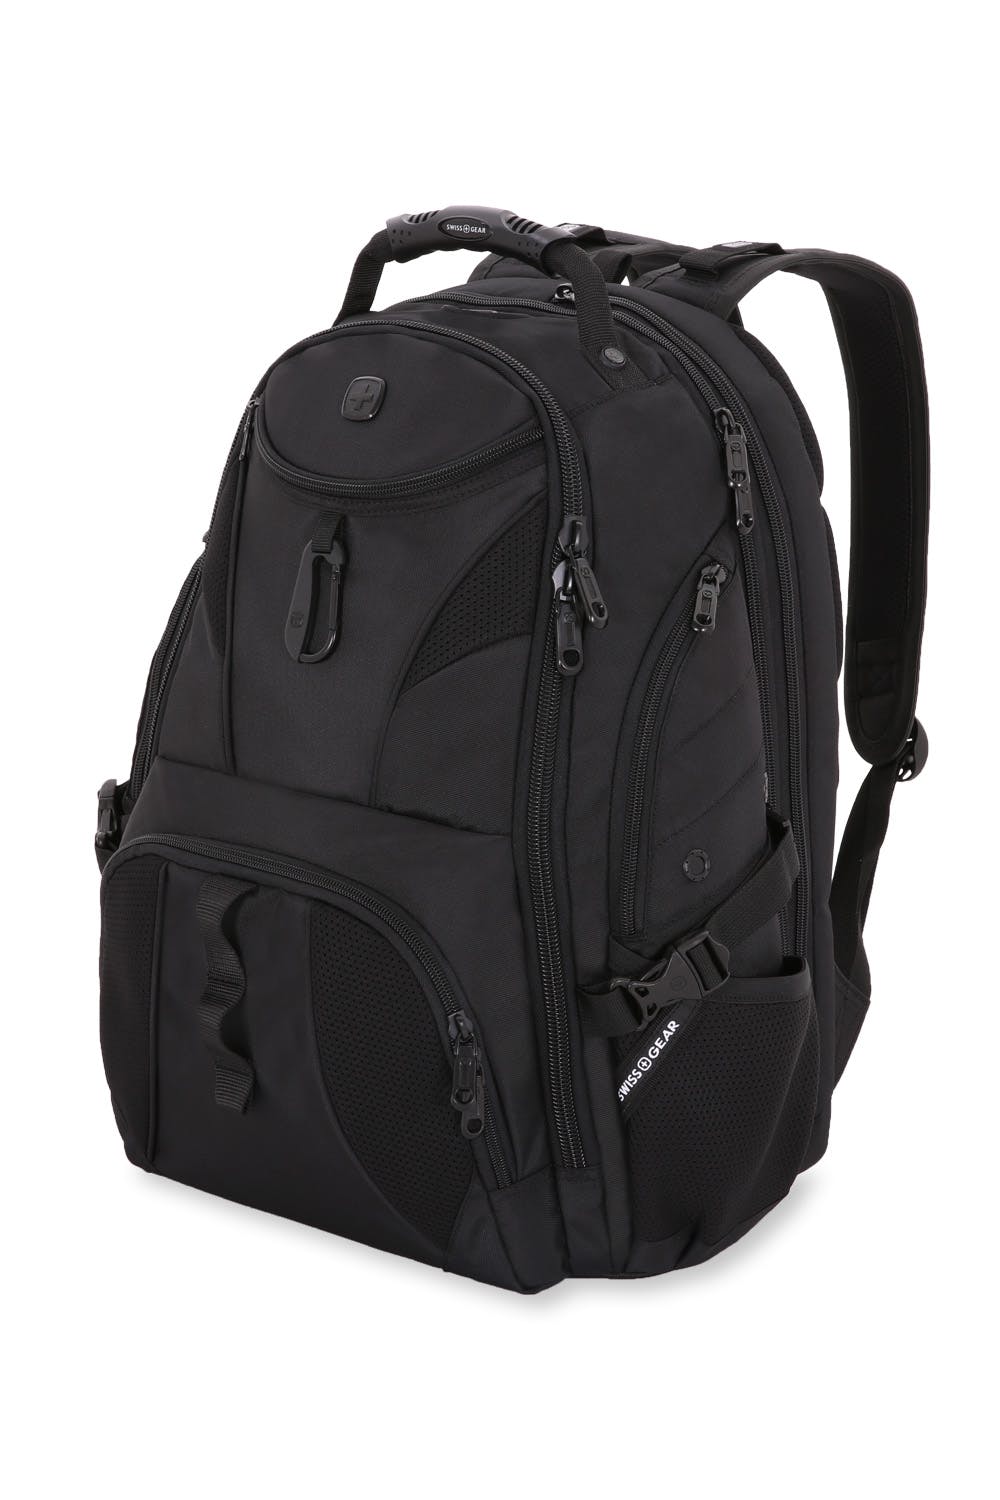 Urban Gears: Best Laptop Bags For The City Dweller Under ...